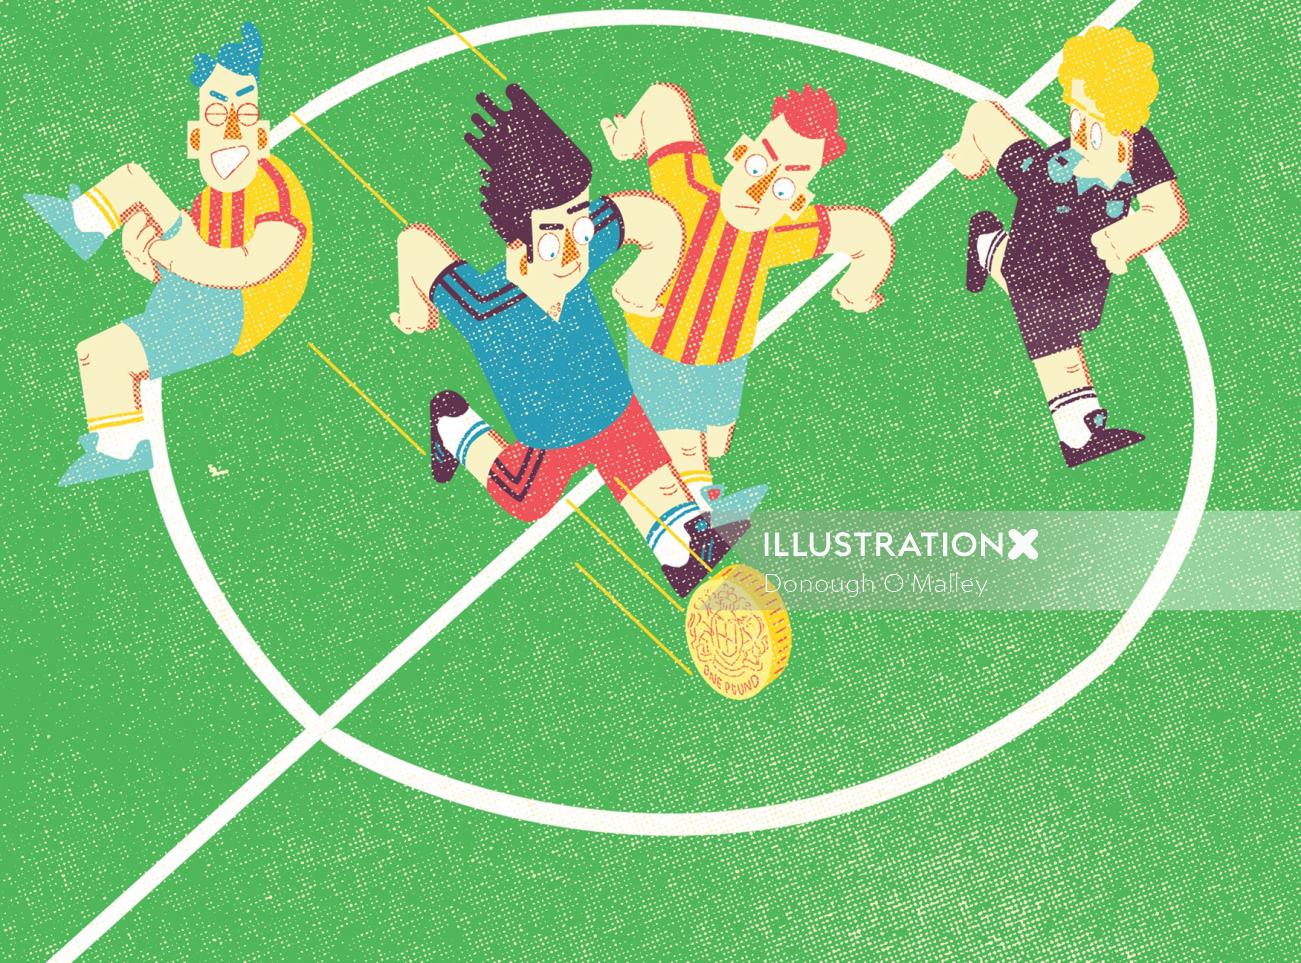 Sports illustration of playing football